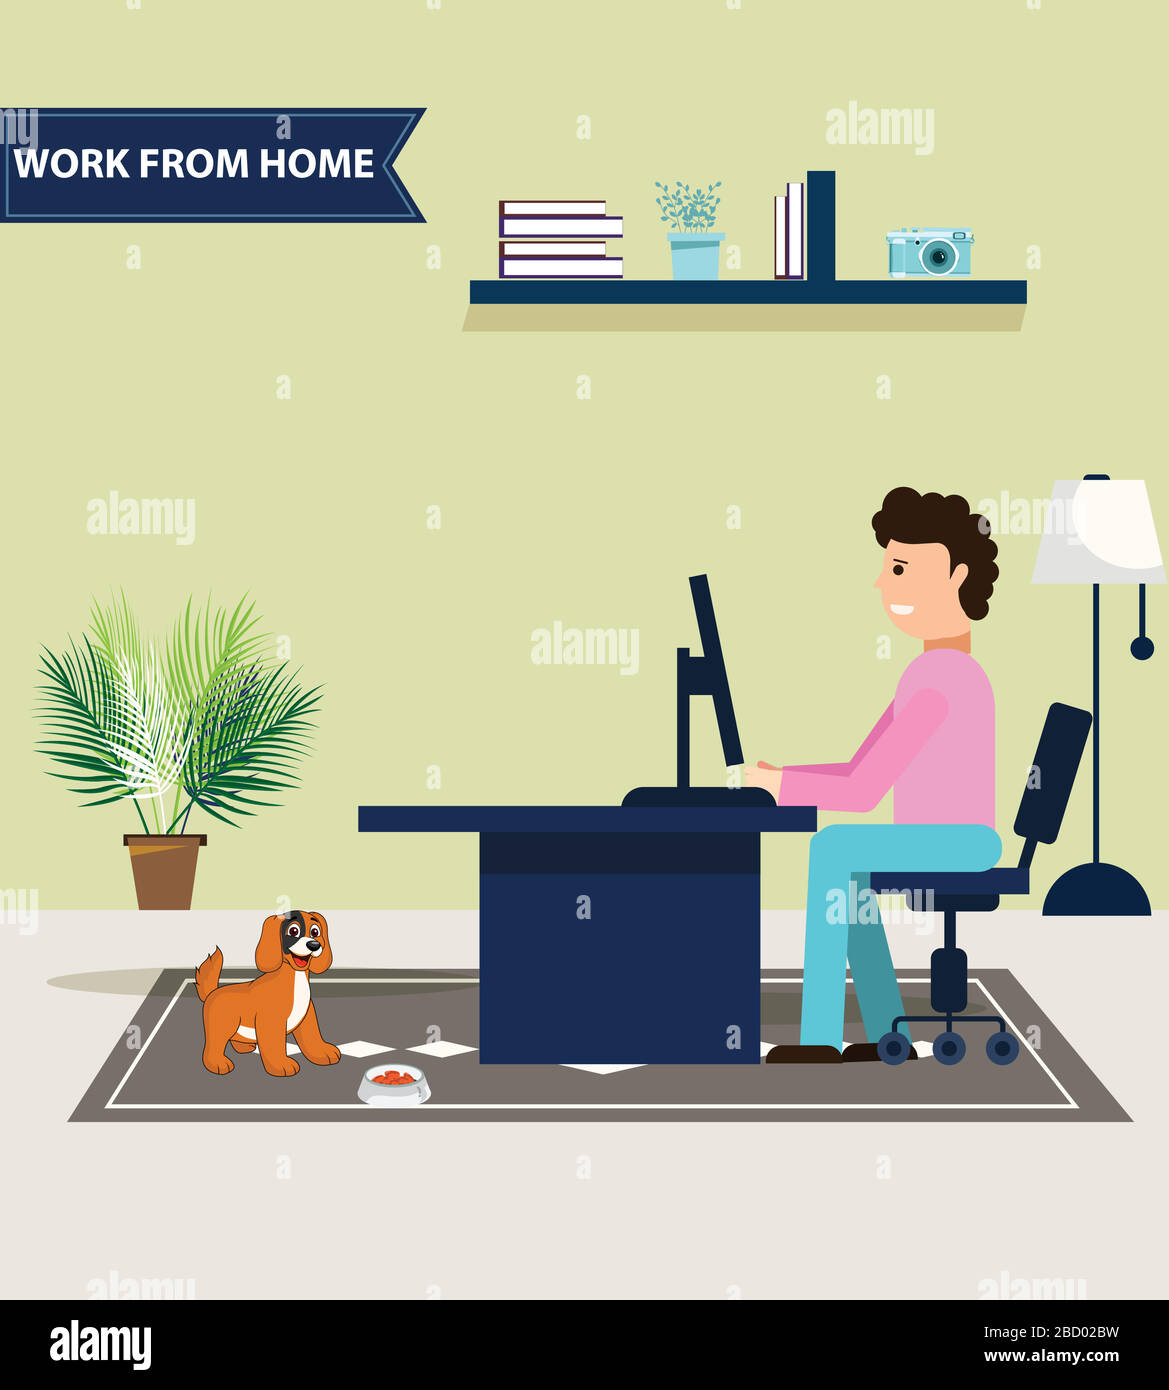 Work from home. Employee sitting on a chair and working with computer and laptop. employee working from home Stock Vector